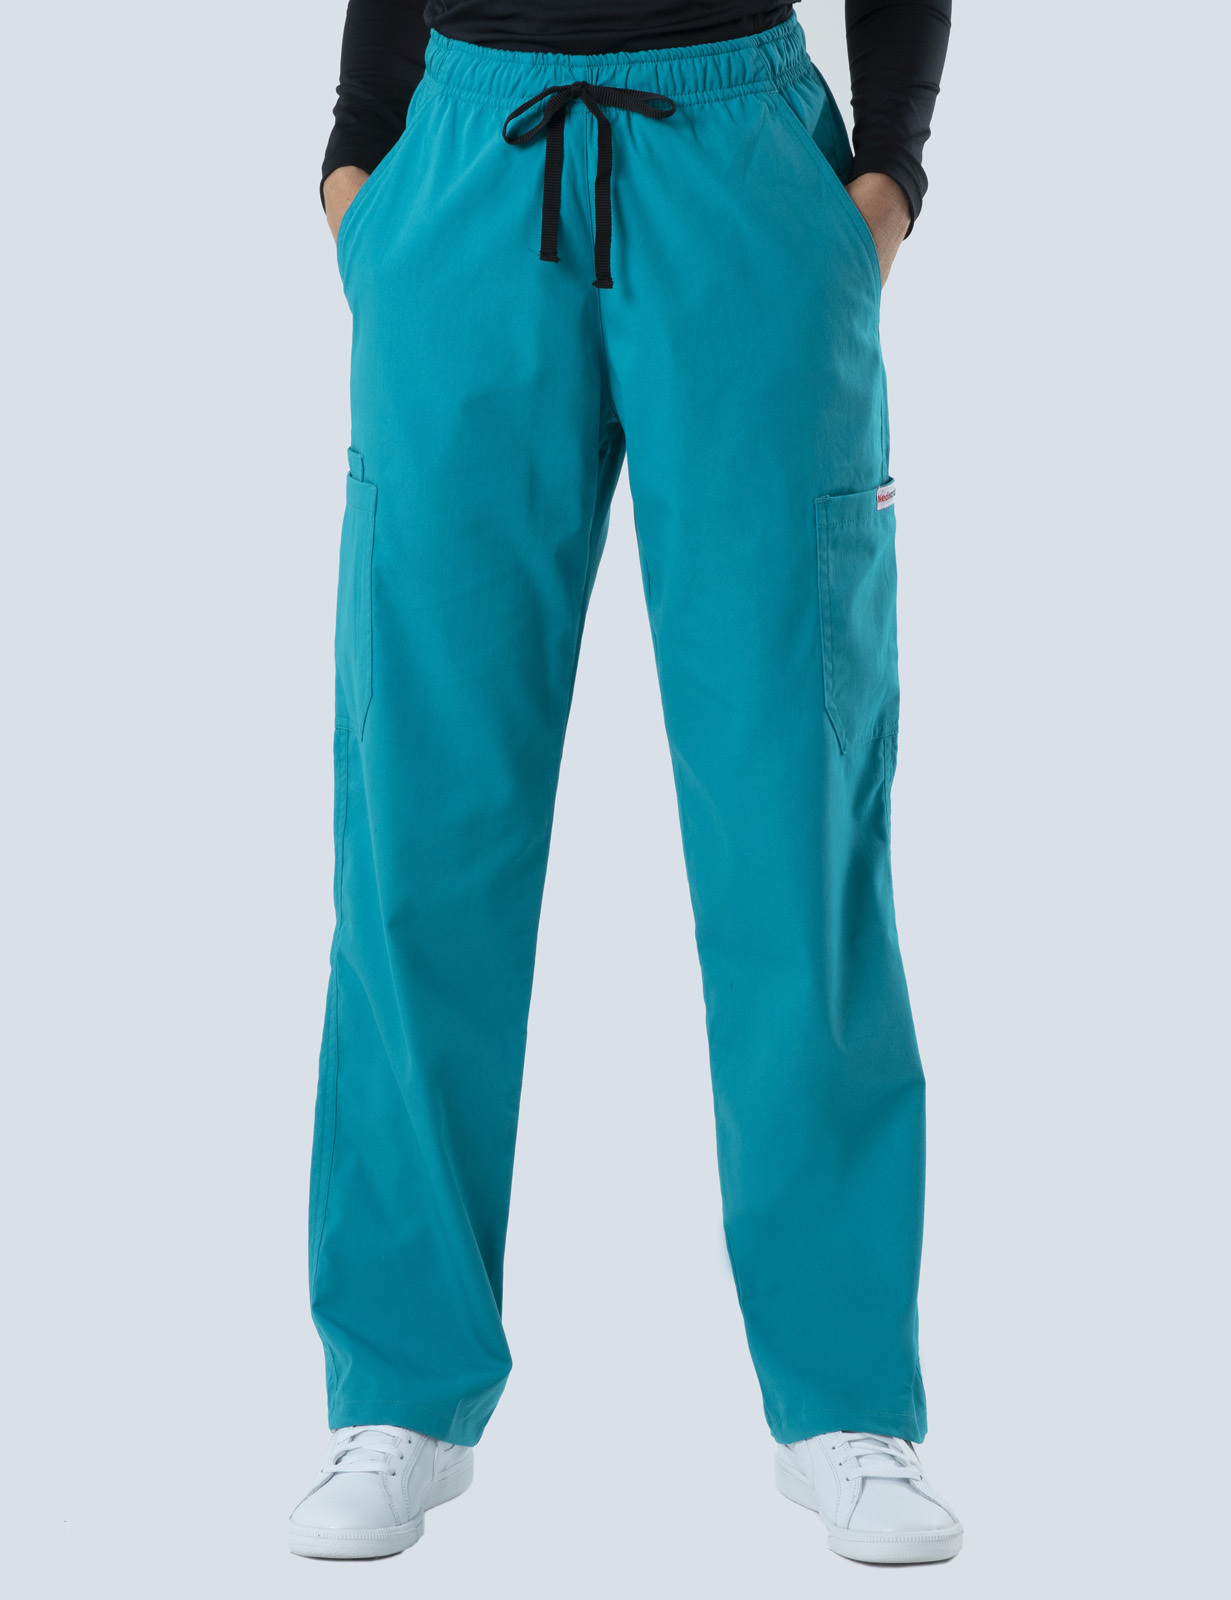 Dental Assistants - Cargo Performance Pants in Teal